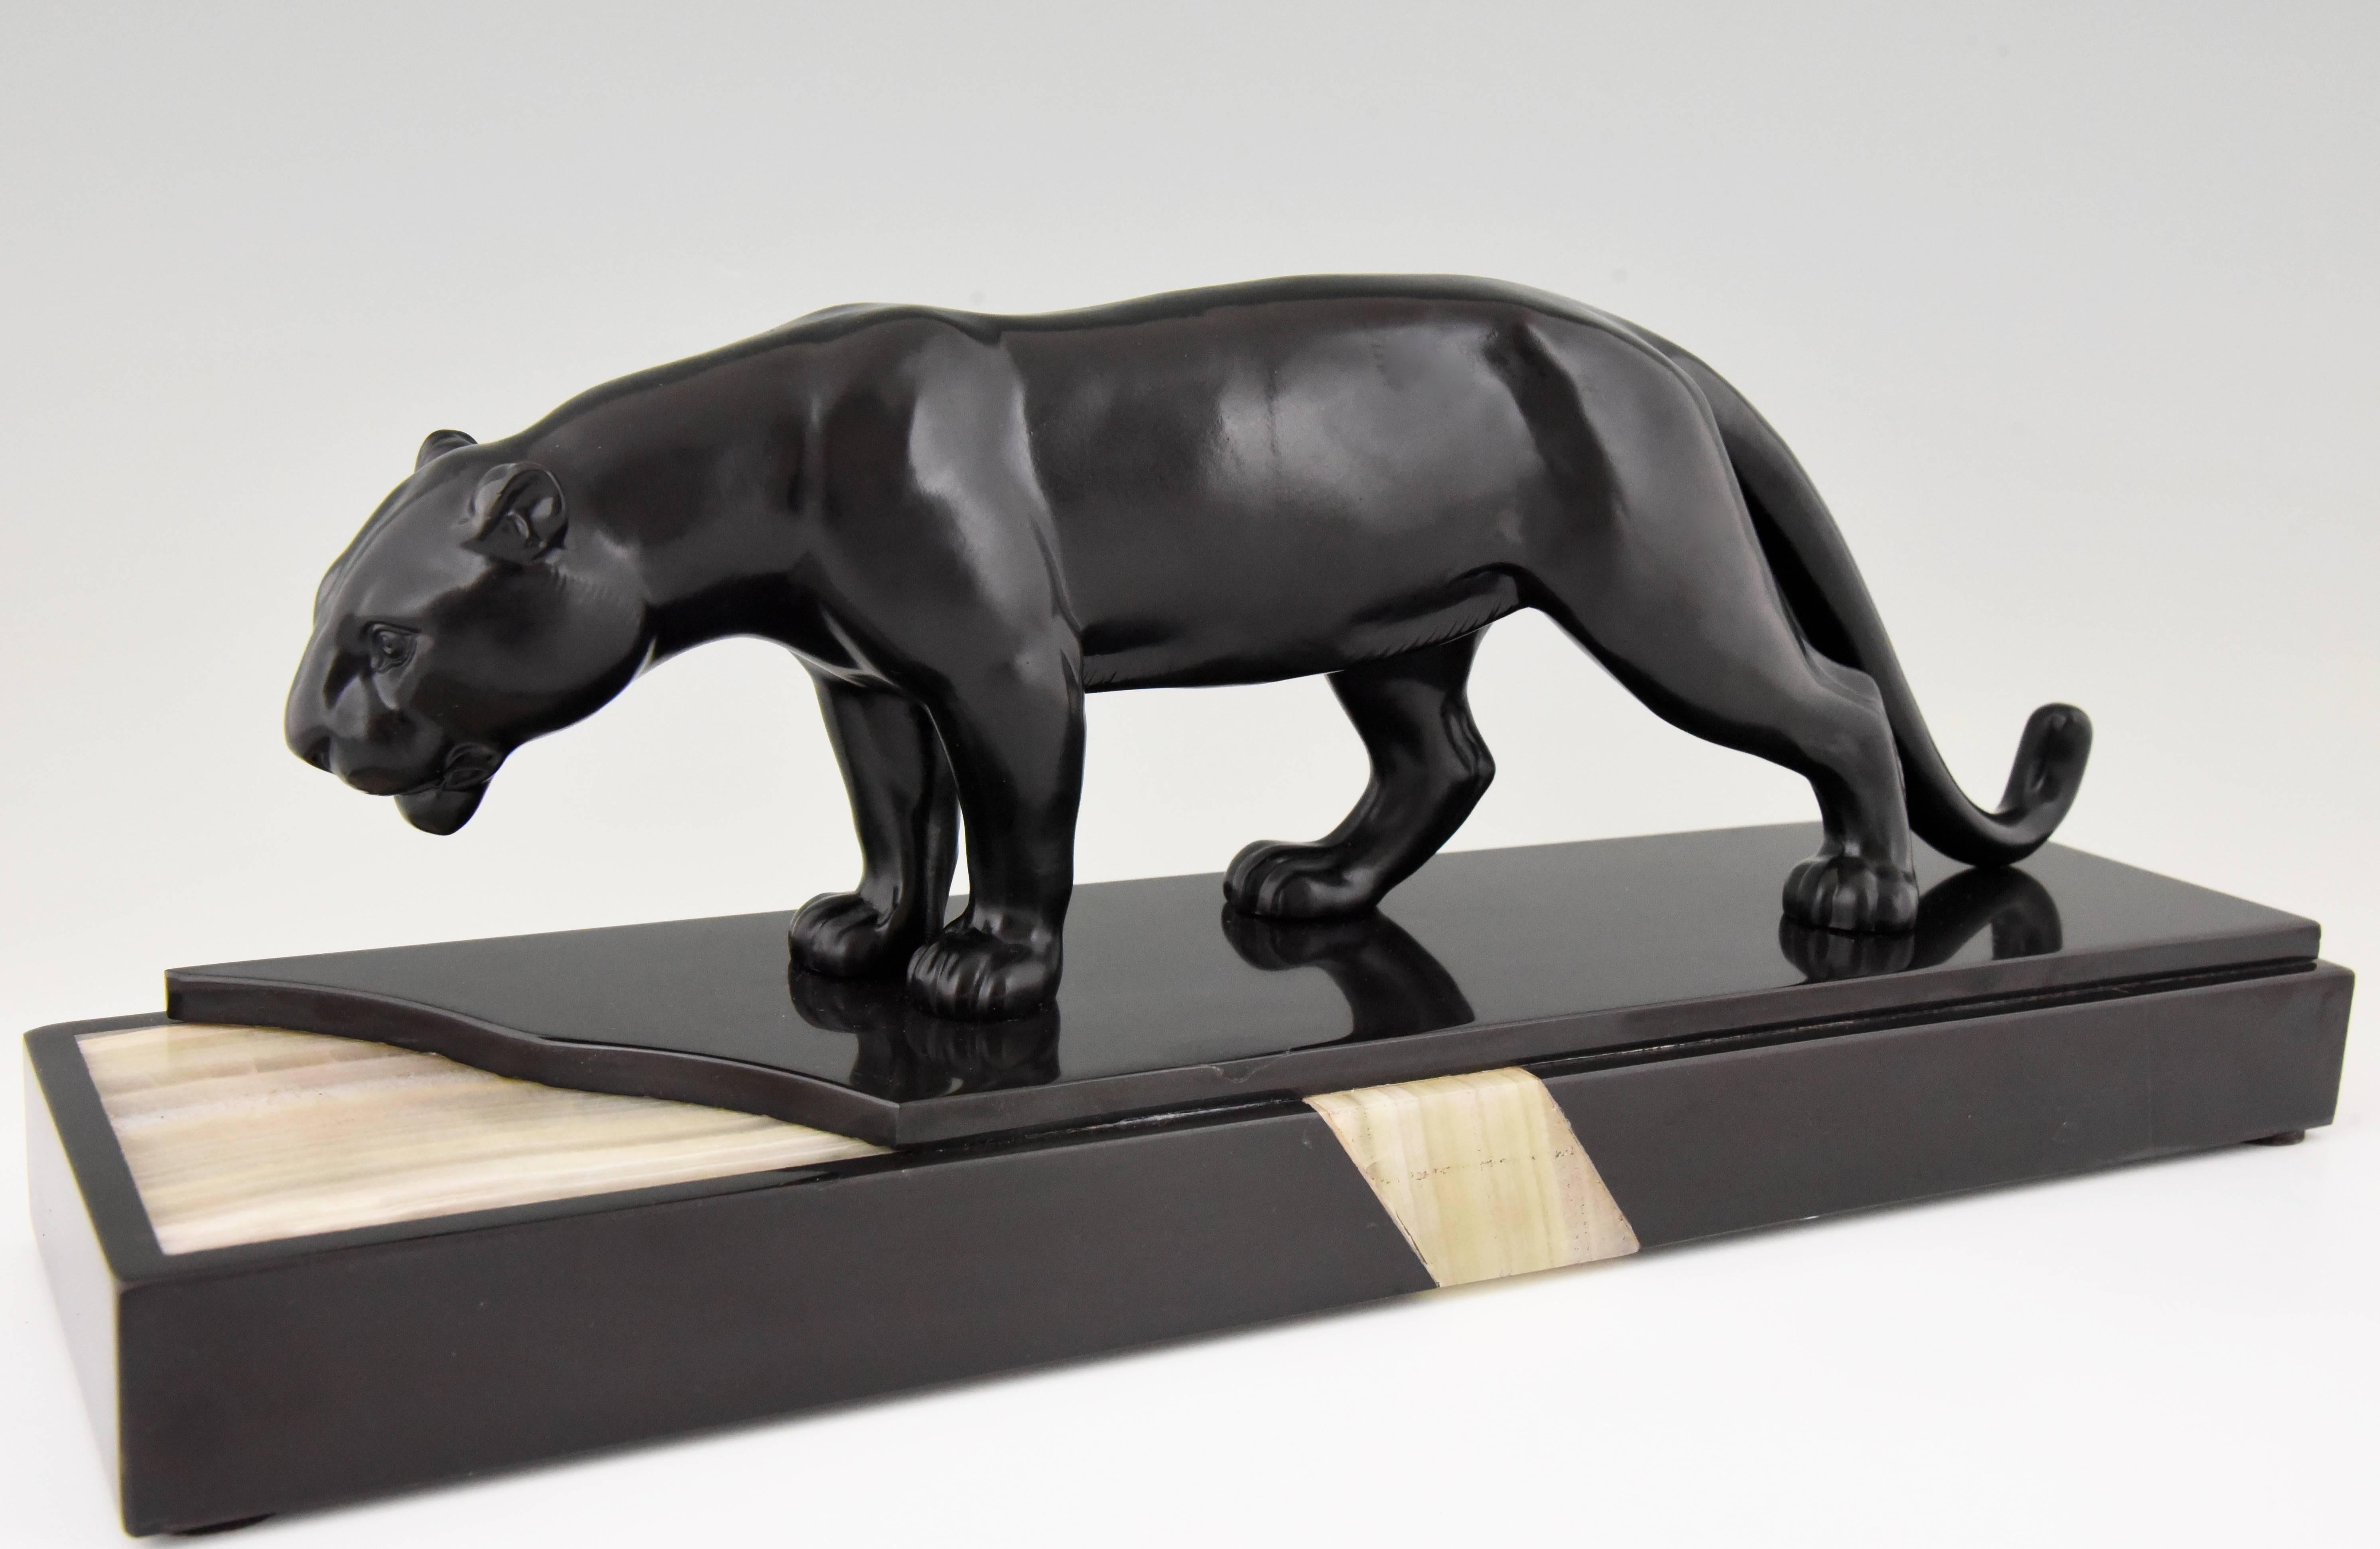 Art Deco sculpture of a panther drinking at the waterside. The black marble and onyx base gives the sculpture a special effect. Signature/ marks: Luc. Style: Art Deco. Date: 1930. Material: Patinated art metal. Black marble and onyx base. Origin: